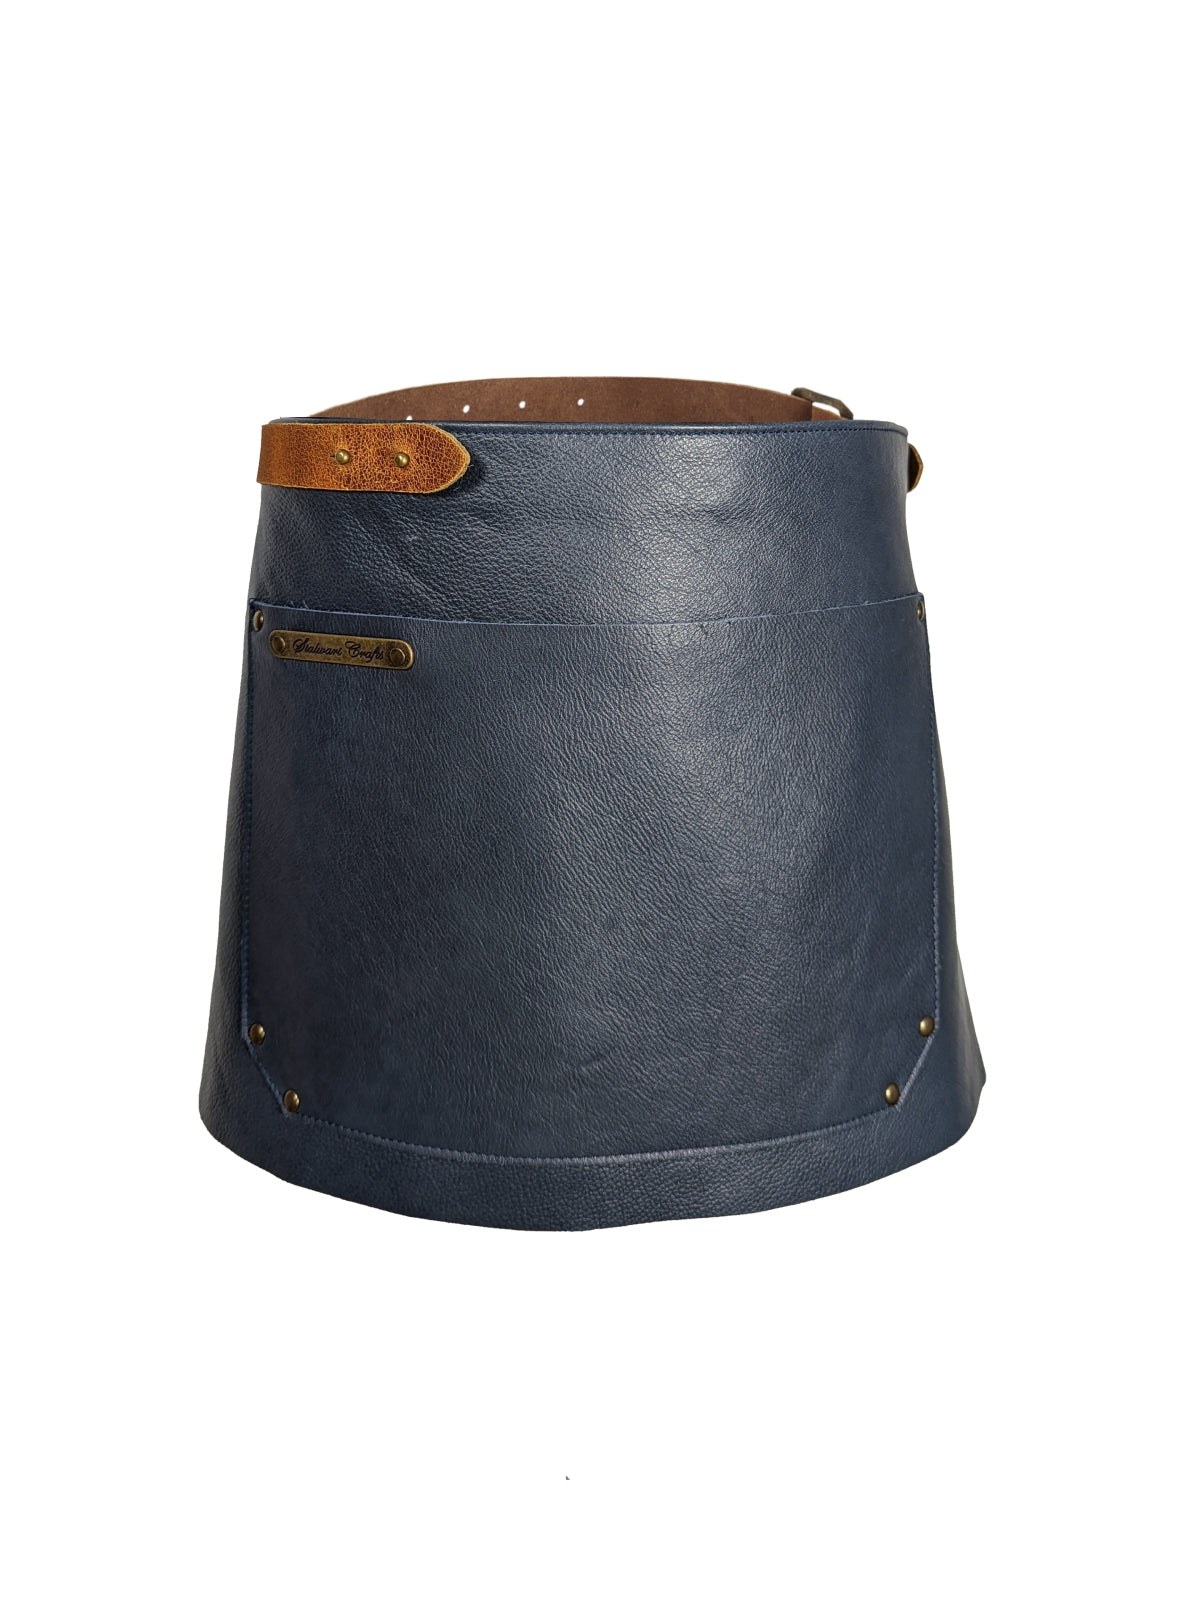 Leather Waist Apron Deluxe Blue by Stalwart -  ChefsCotton